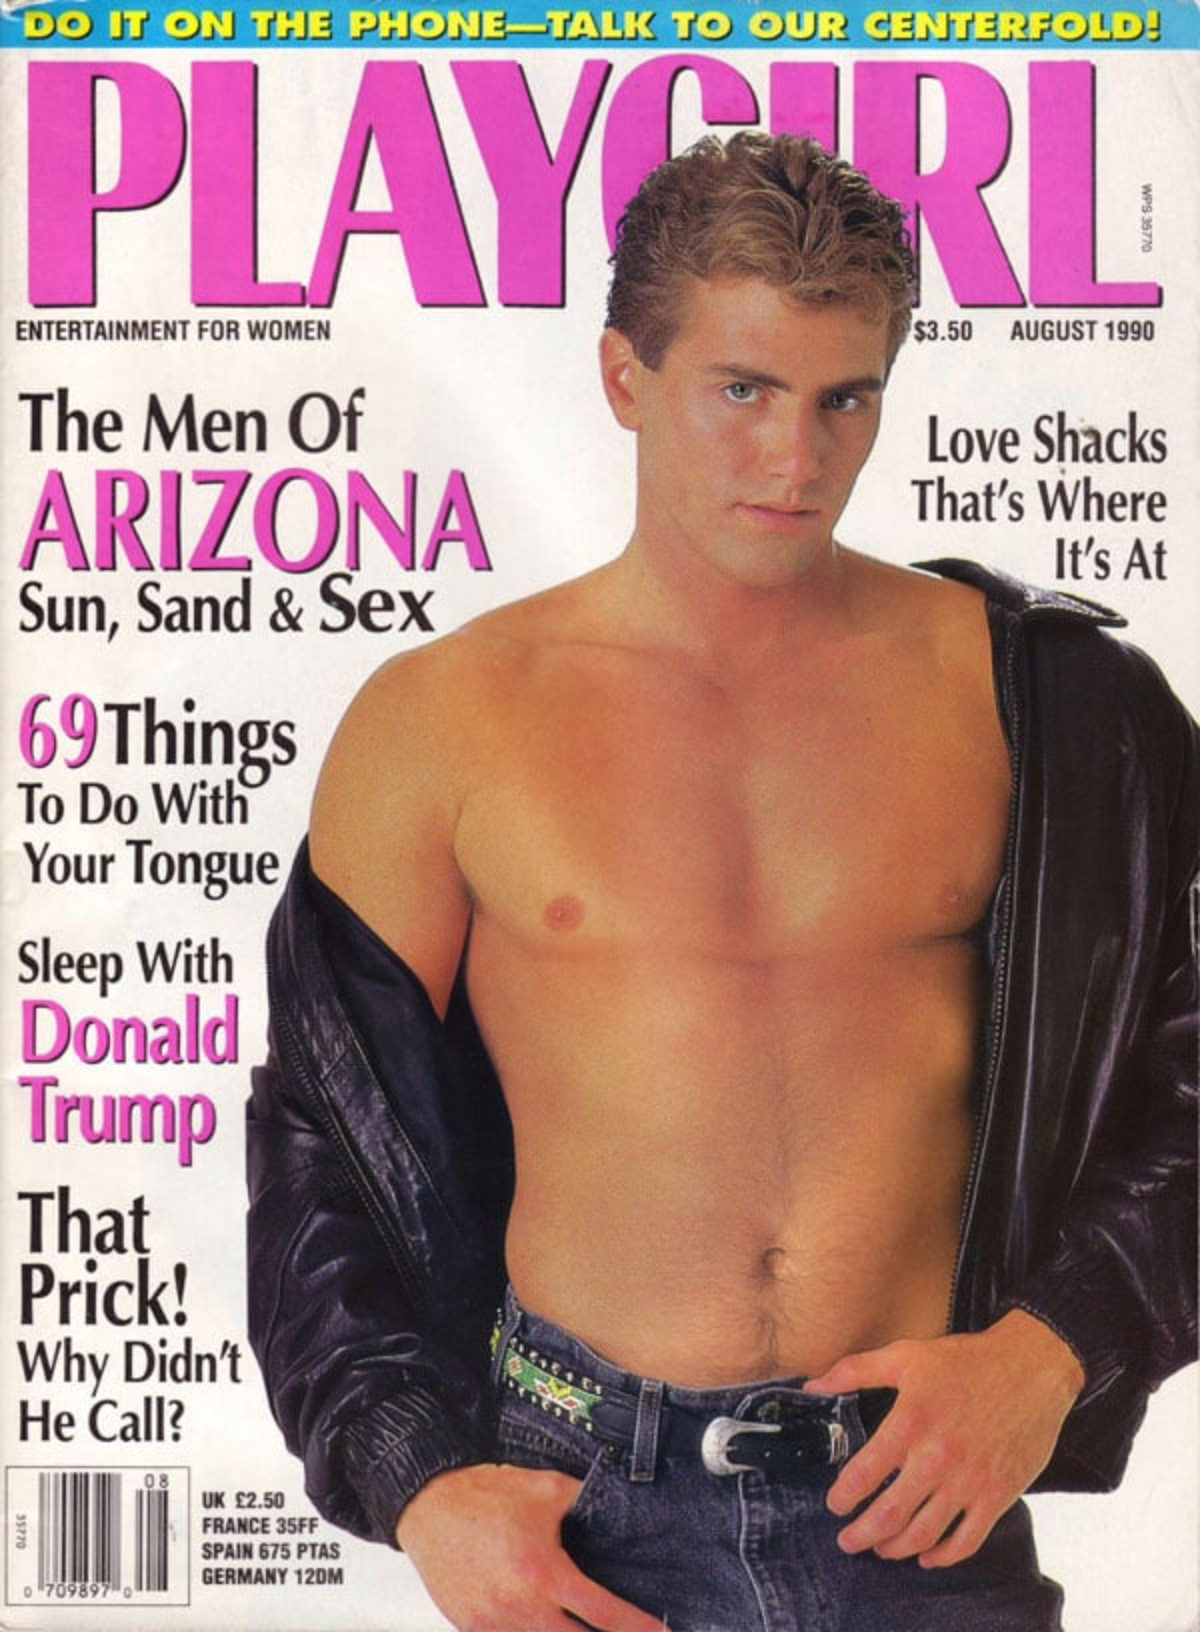 In August 1990, Playgirl magazine advertised the chance to "Sleep with...